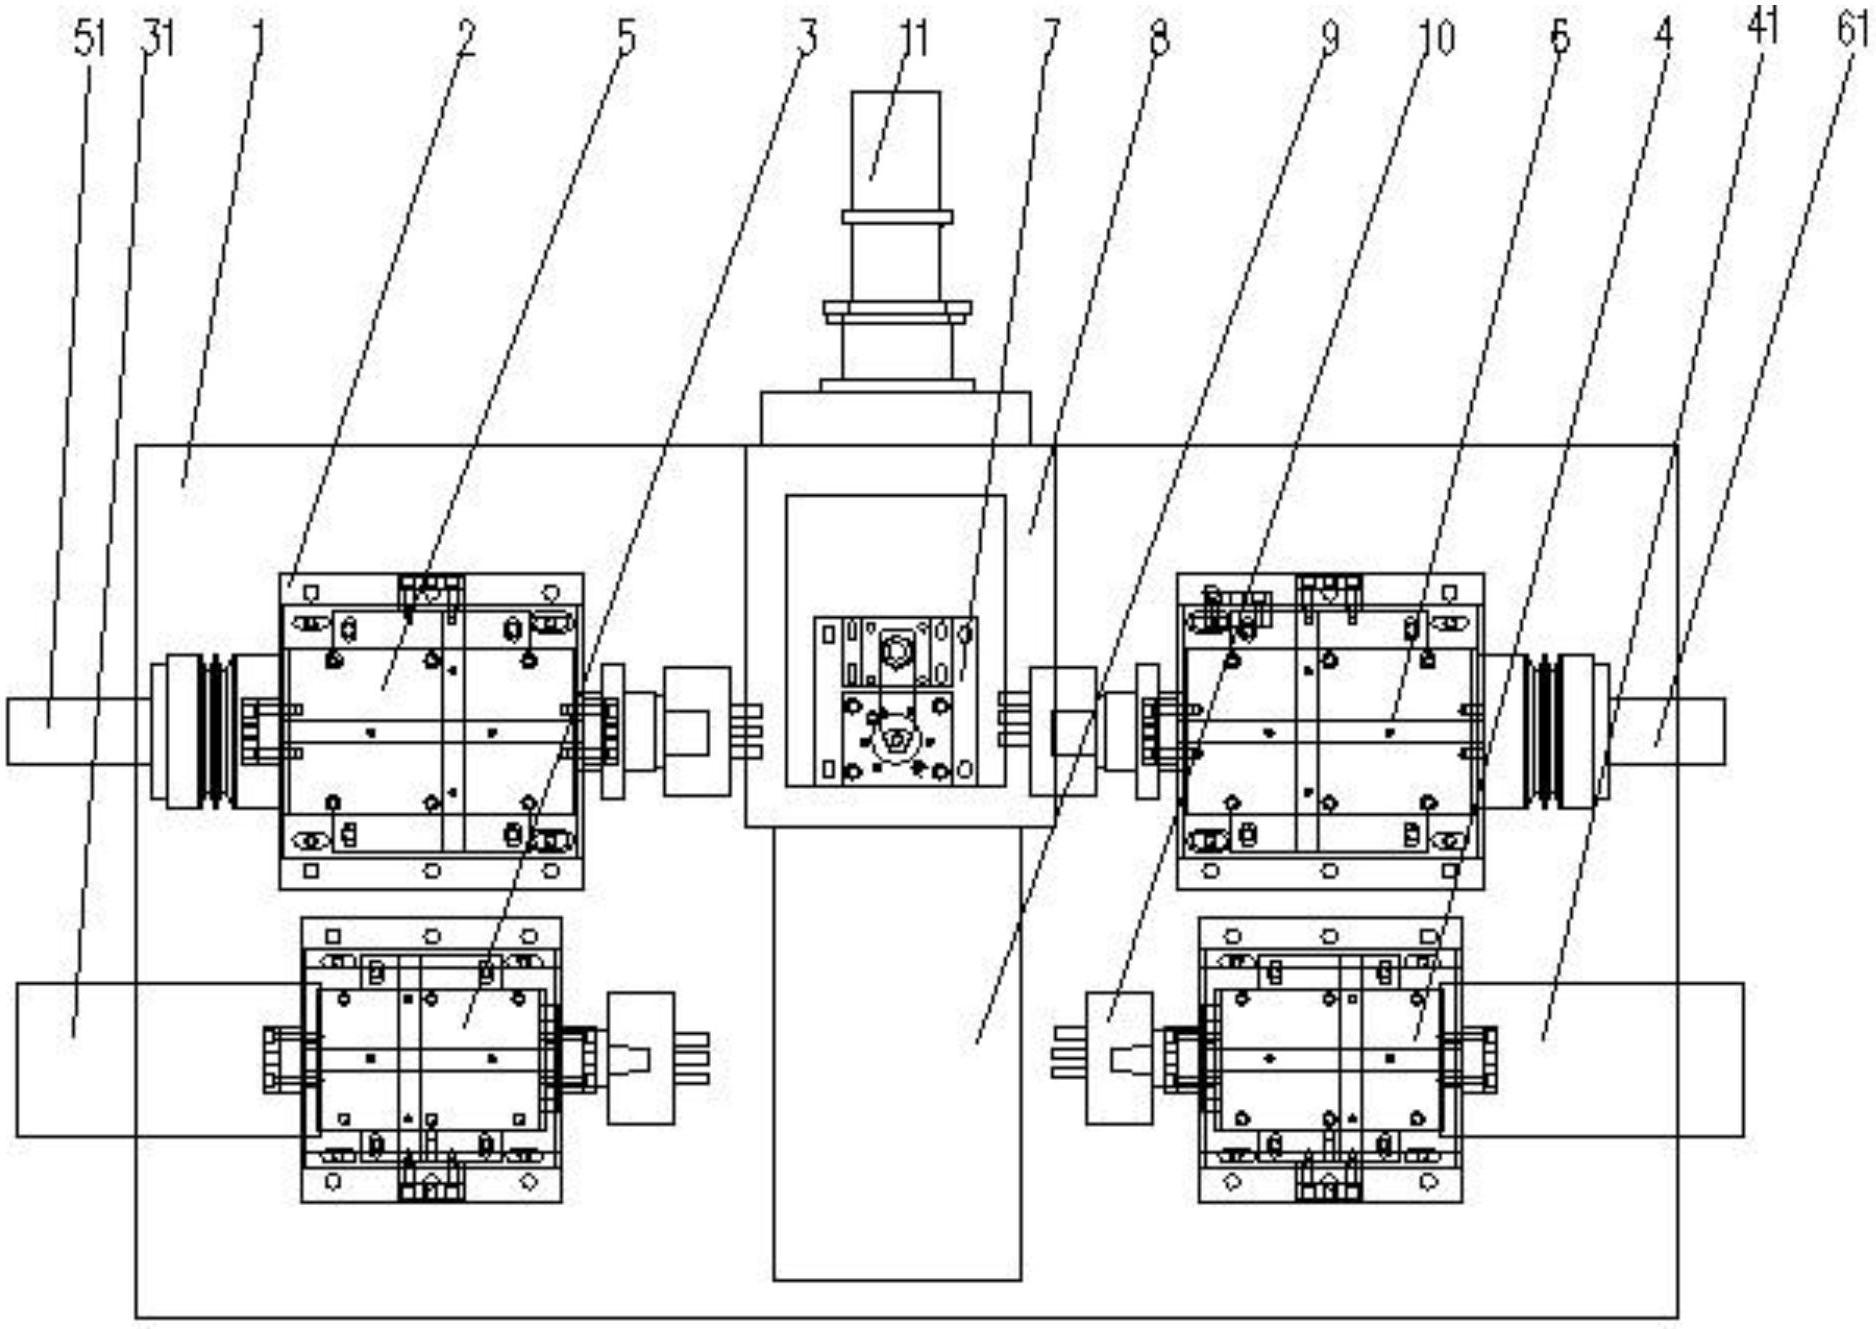 Machine tool for simultaneously machining threaded holes on air inlet side and air outlet side of cylinder